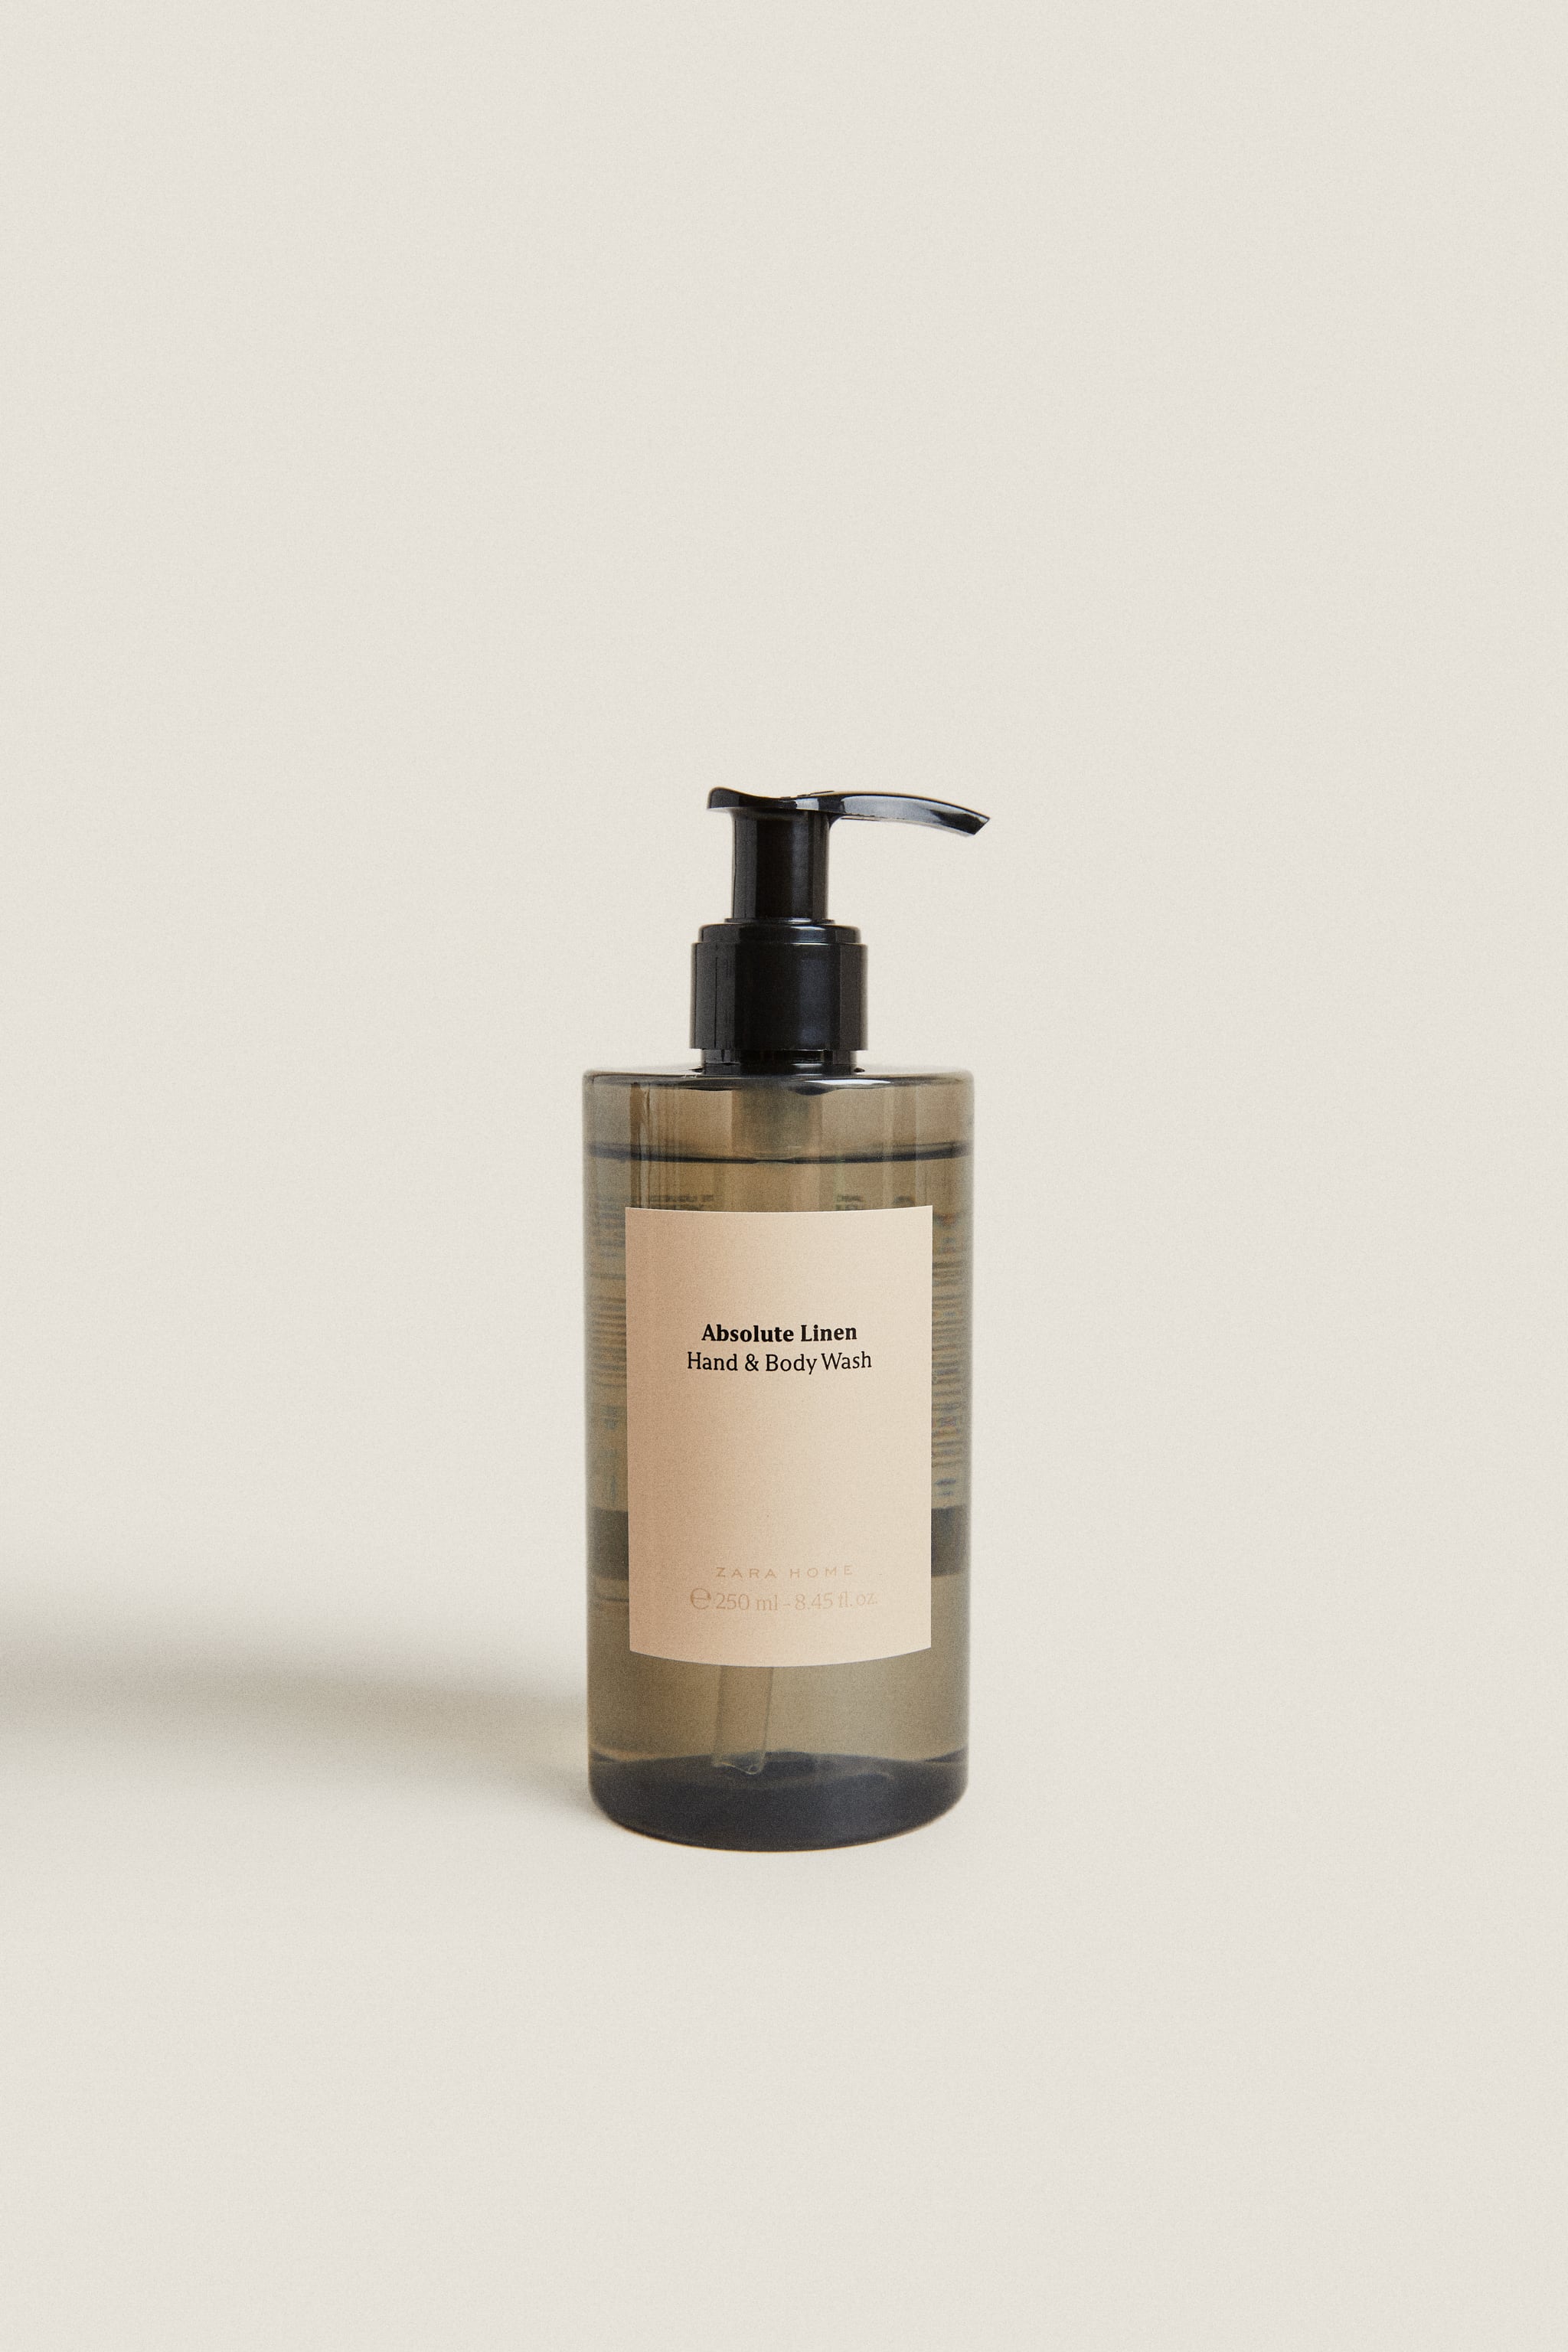 oz) ABSOLUTE LINEN LIQUID HAND AND BODY SOAP